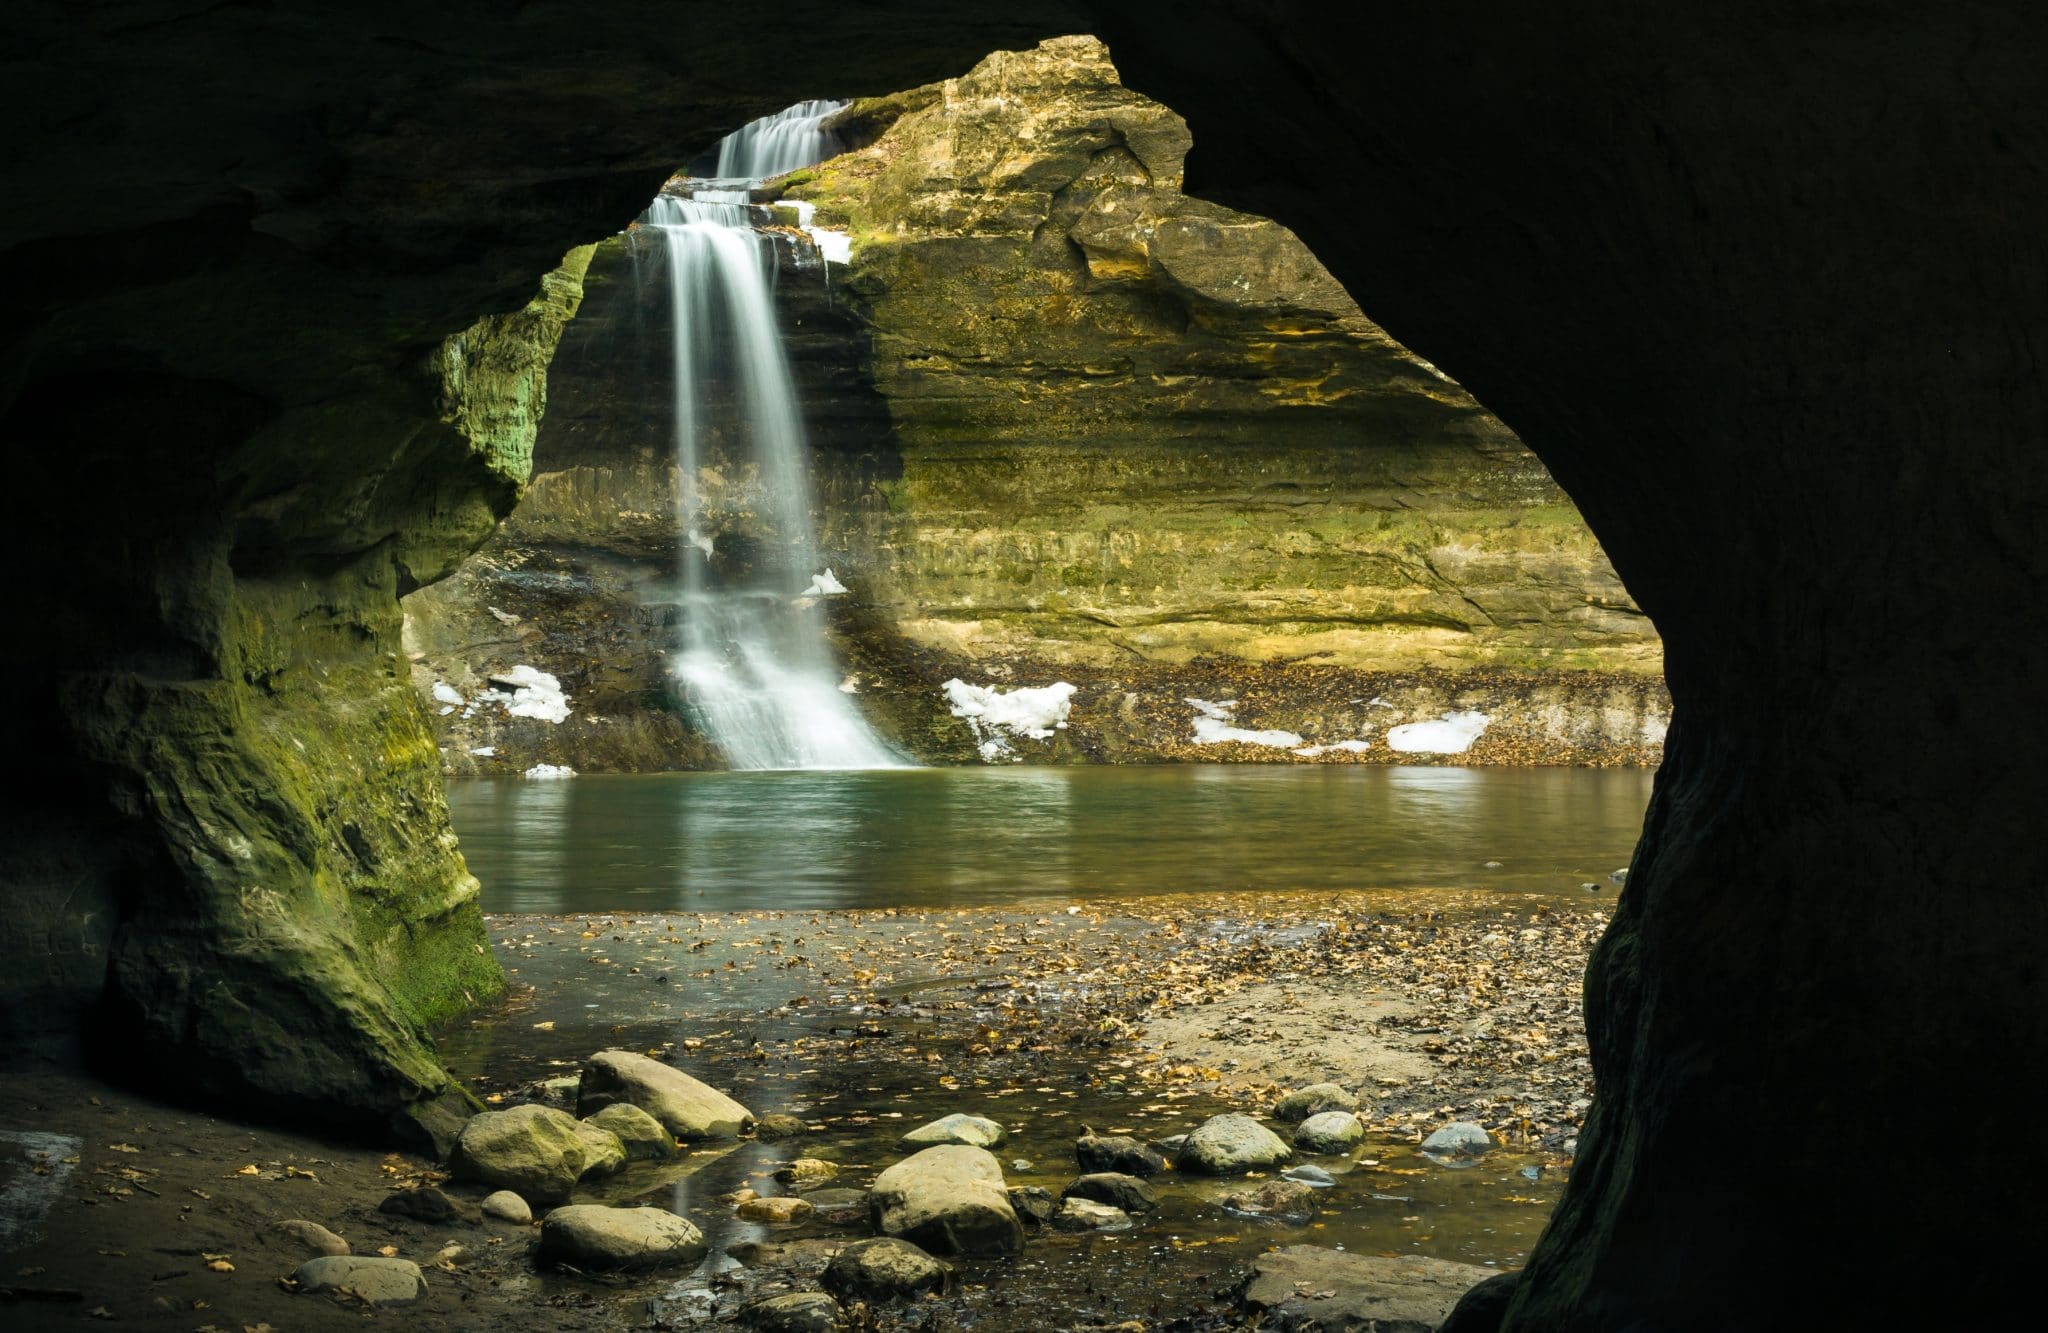 Image of the Cascade Falls located in Matthiessen State Park near Chicago